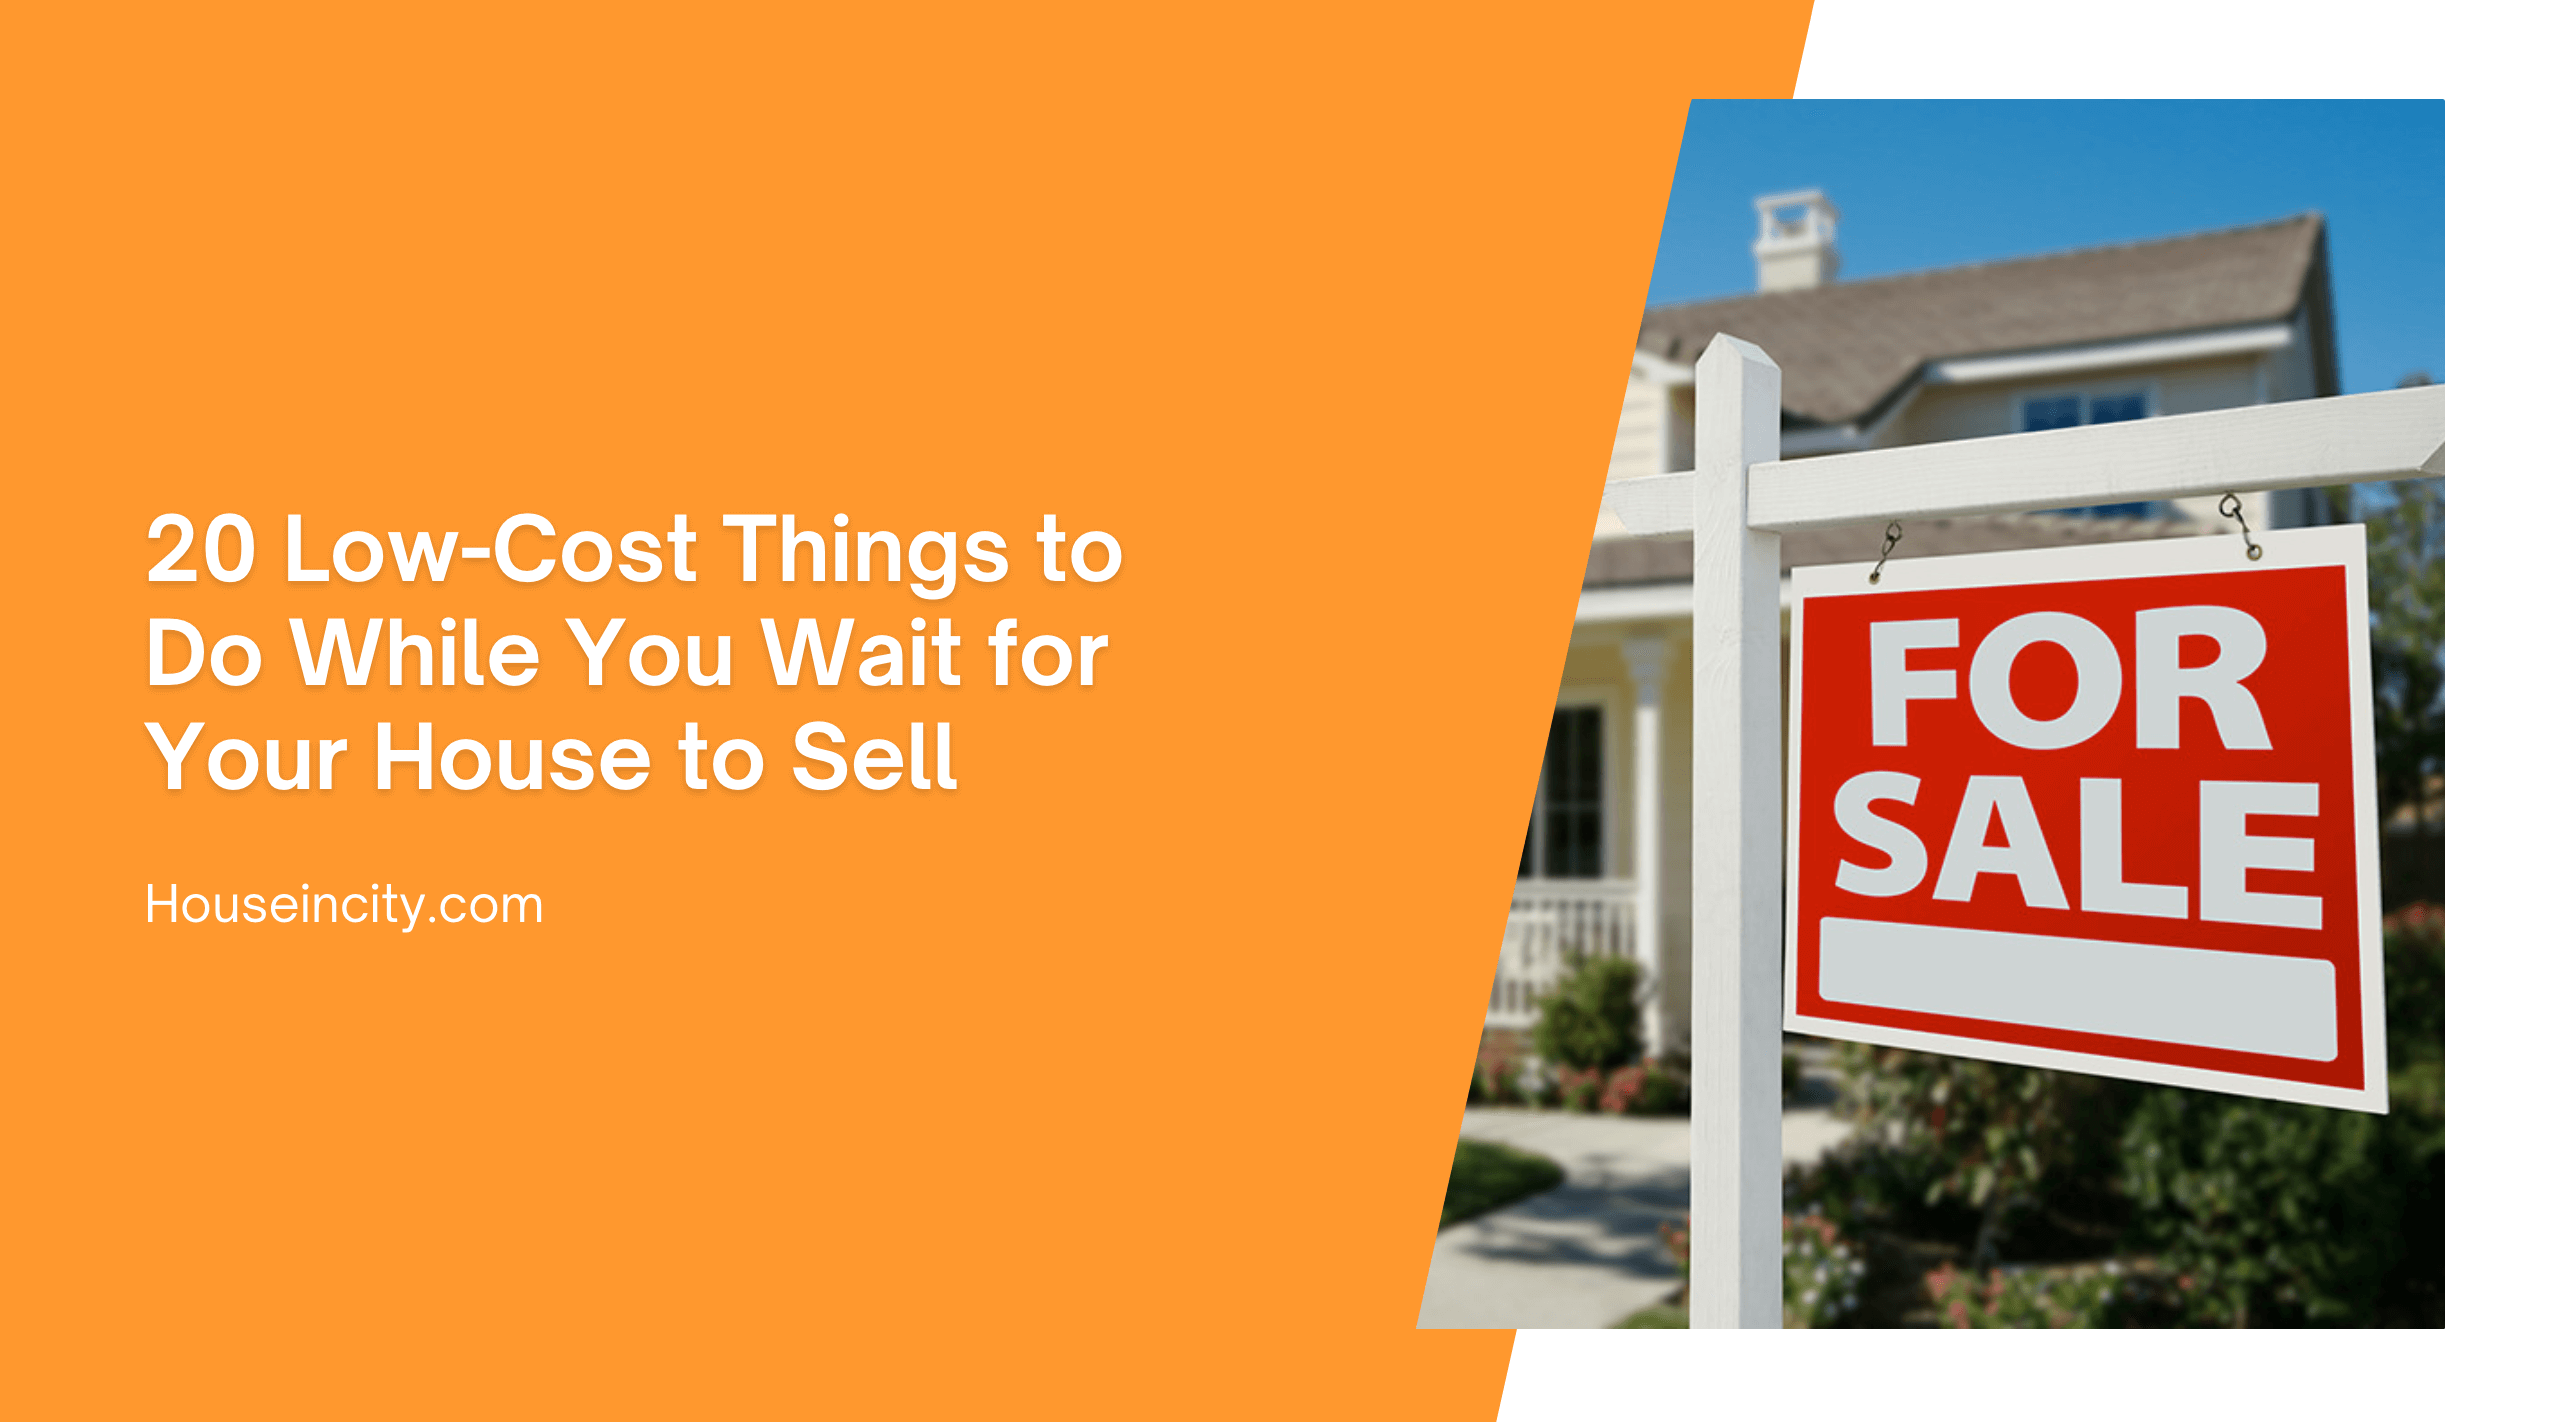 20 Low-Cost Things to Do While You Wait for Your House to Sell